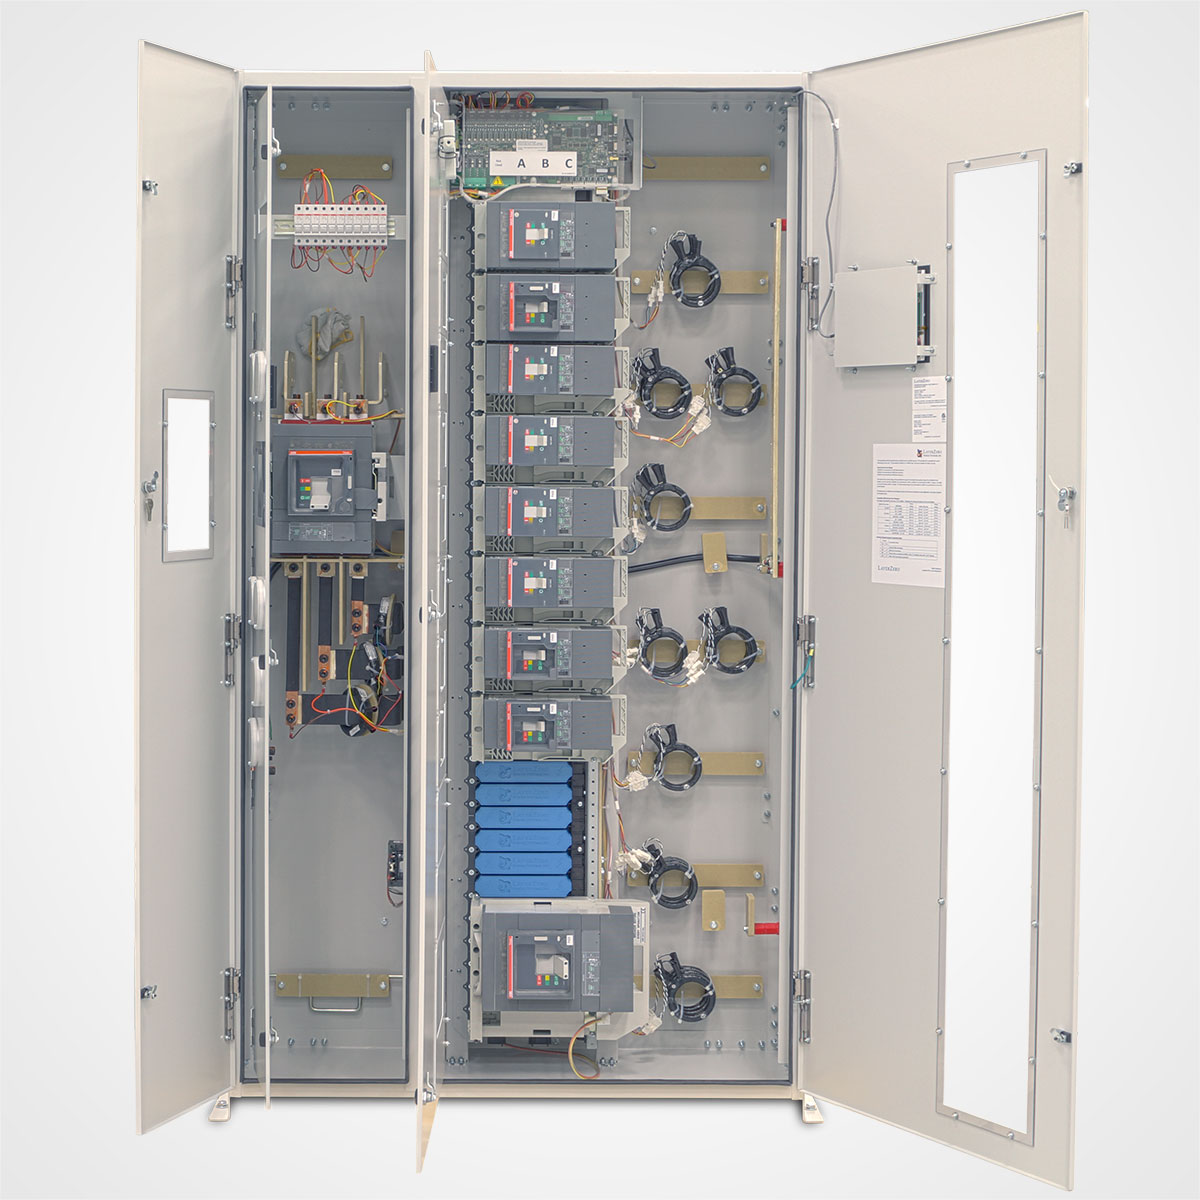 The LayerZero Series 70: eRDP Remote Distribution Panel with Dead Front Doors Open and Circuit Breakers.